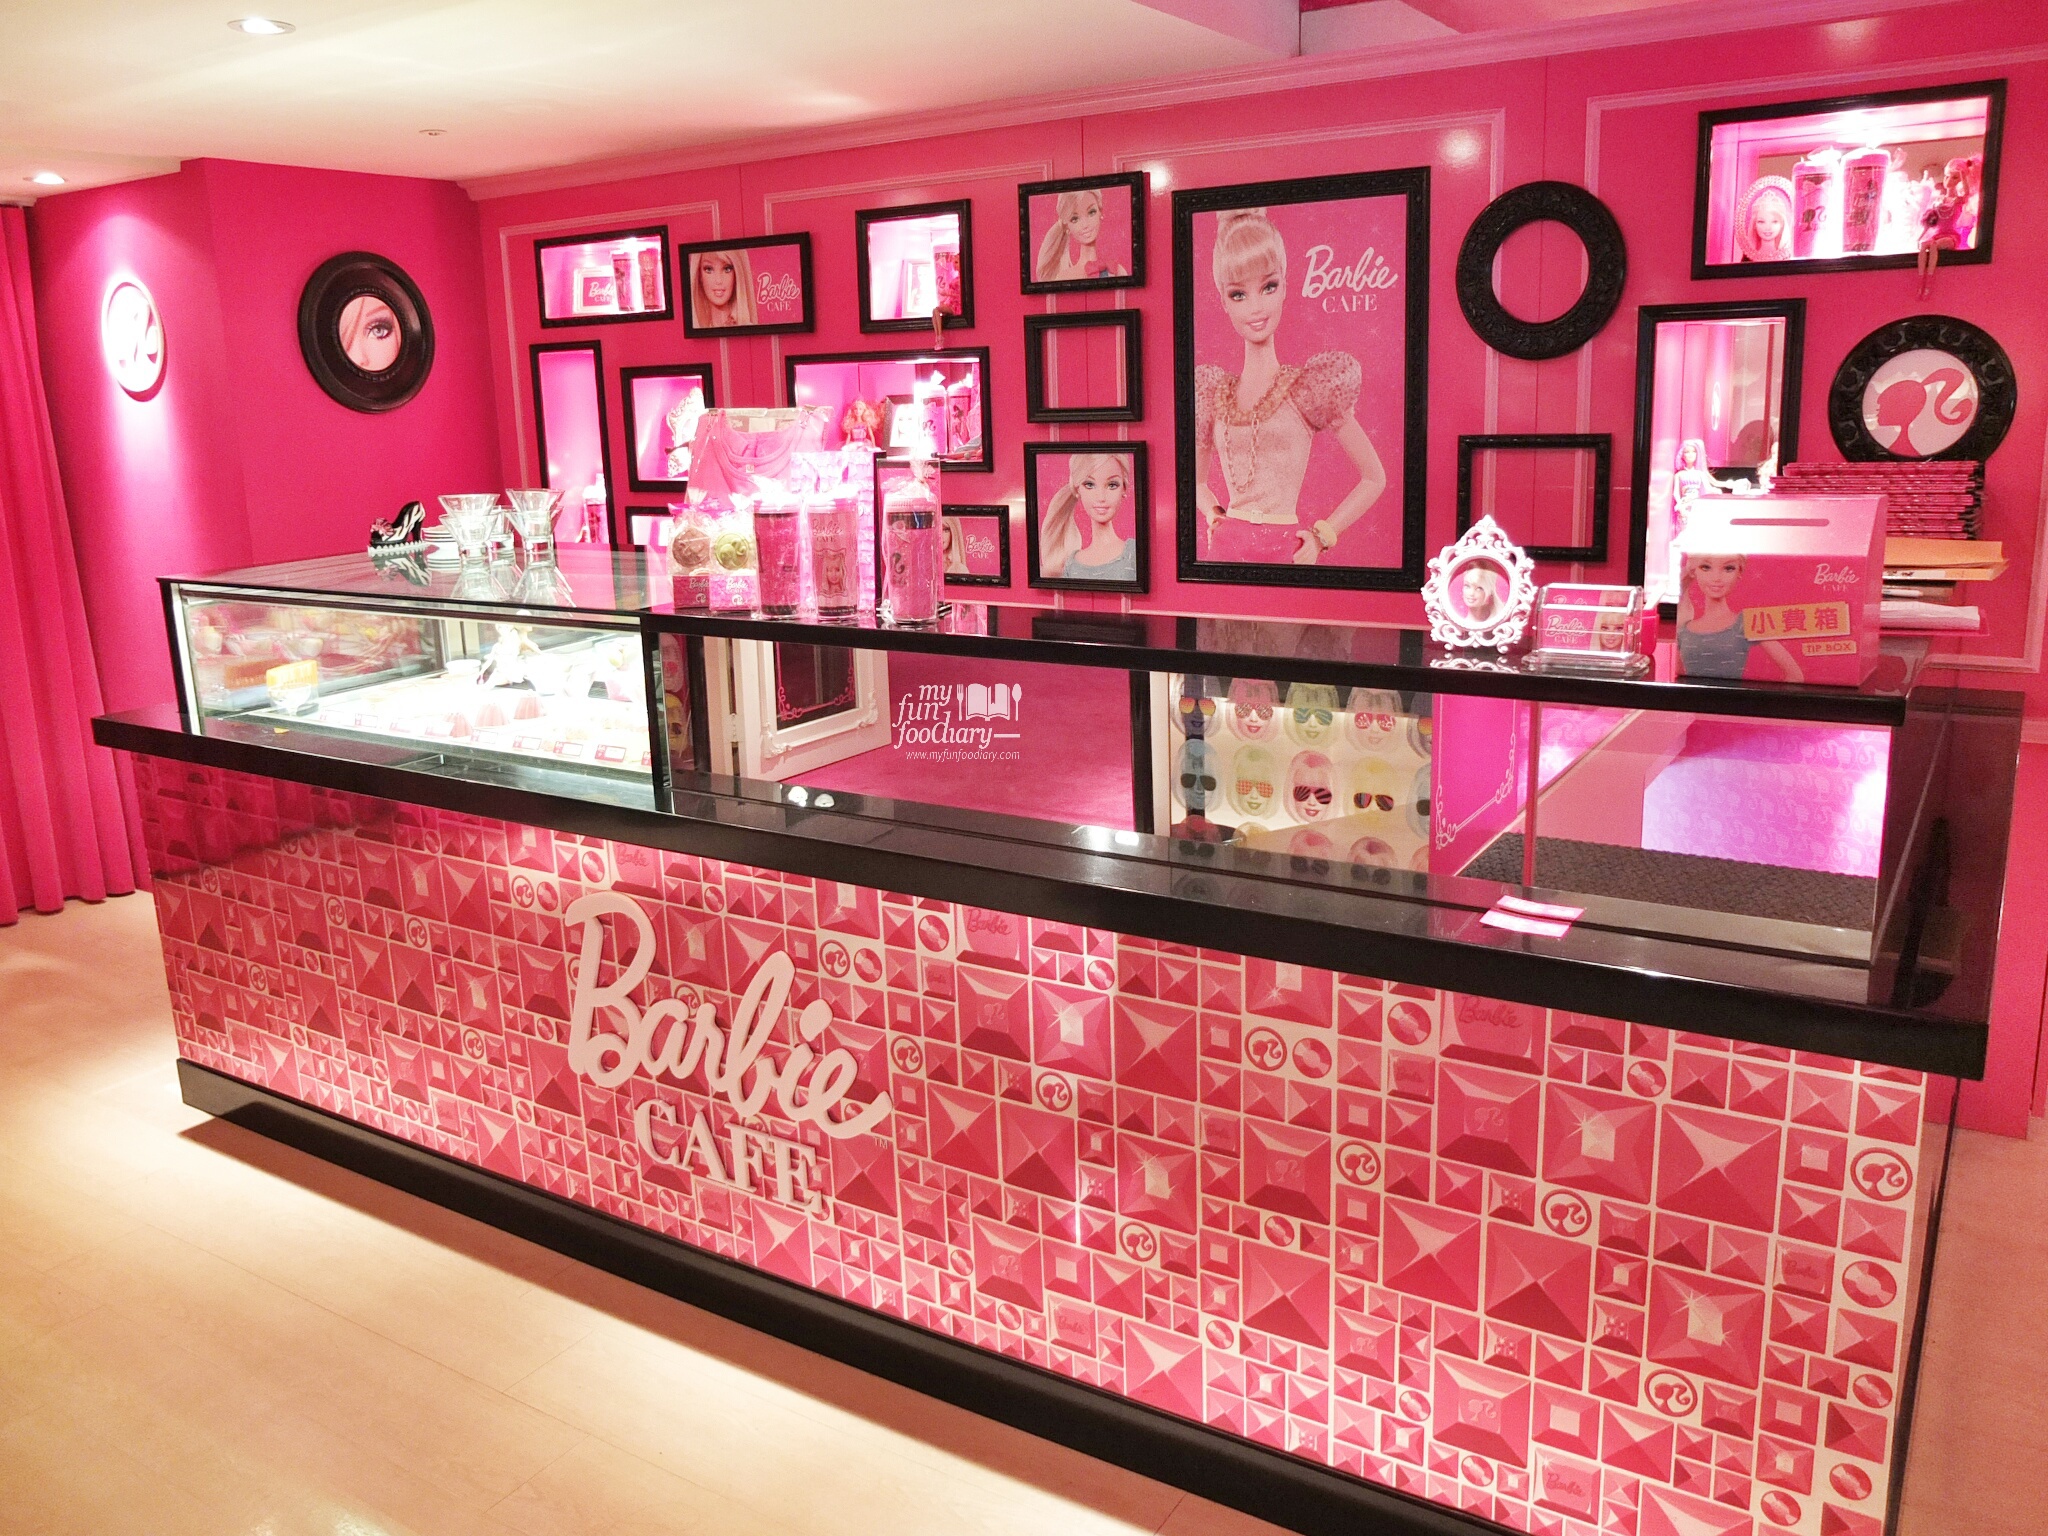 Cake Display at Barbie Cafe Taiwan by Myfunfoodiary